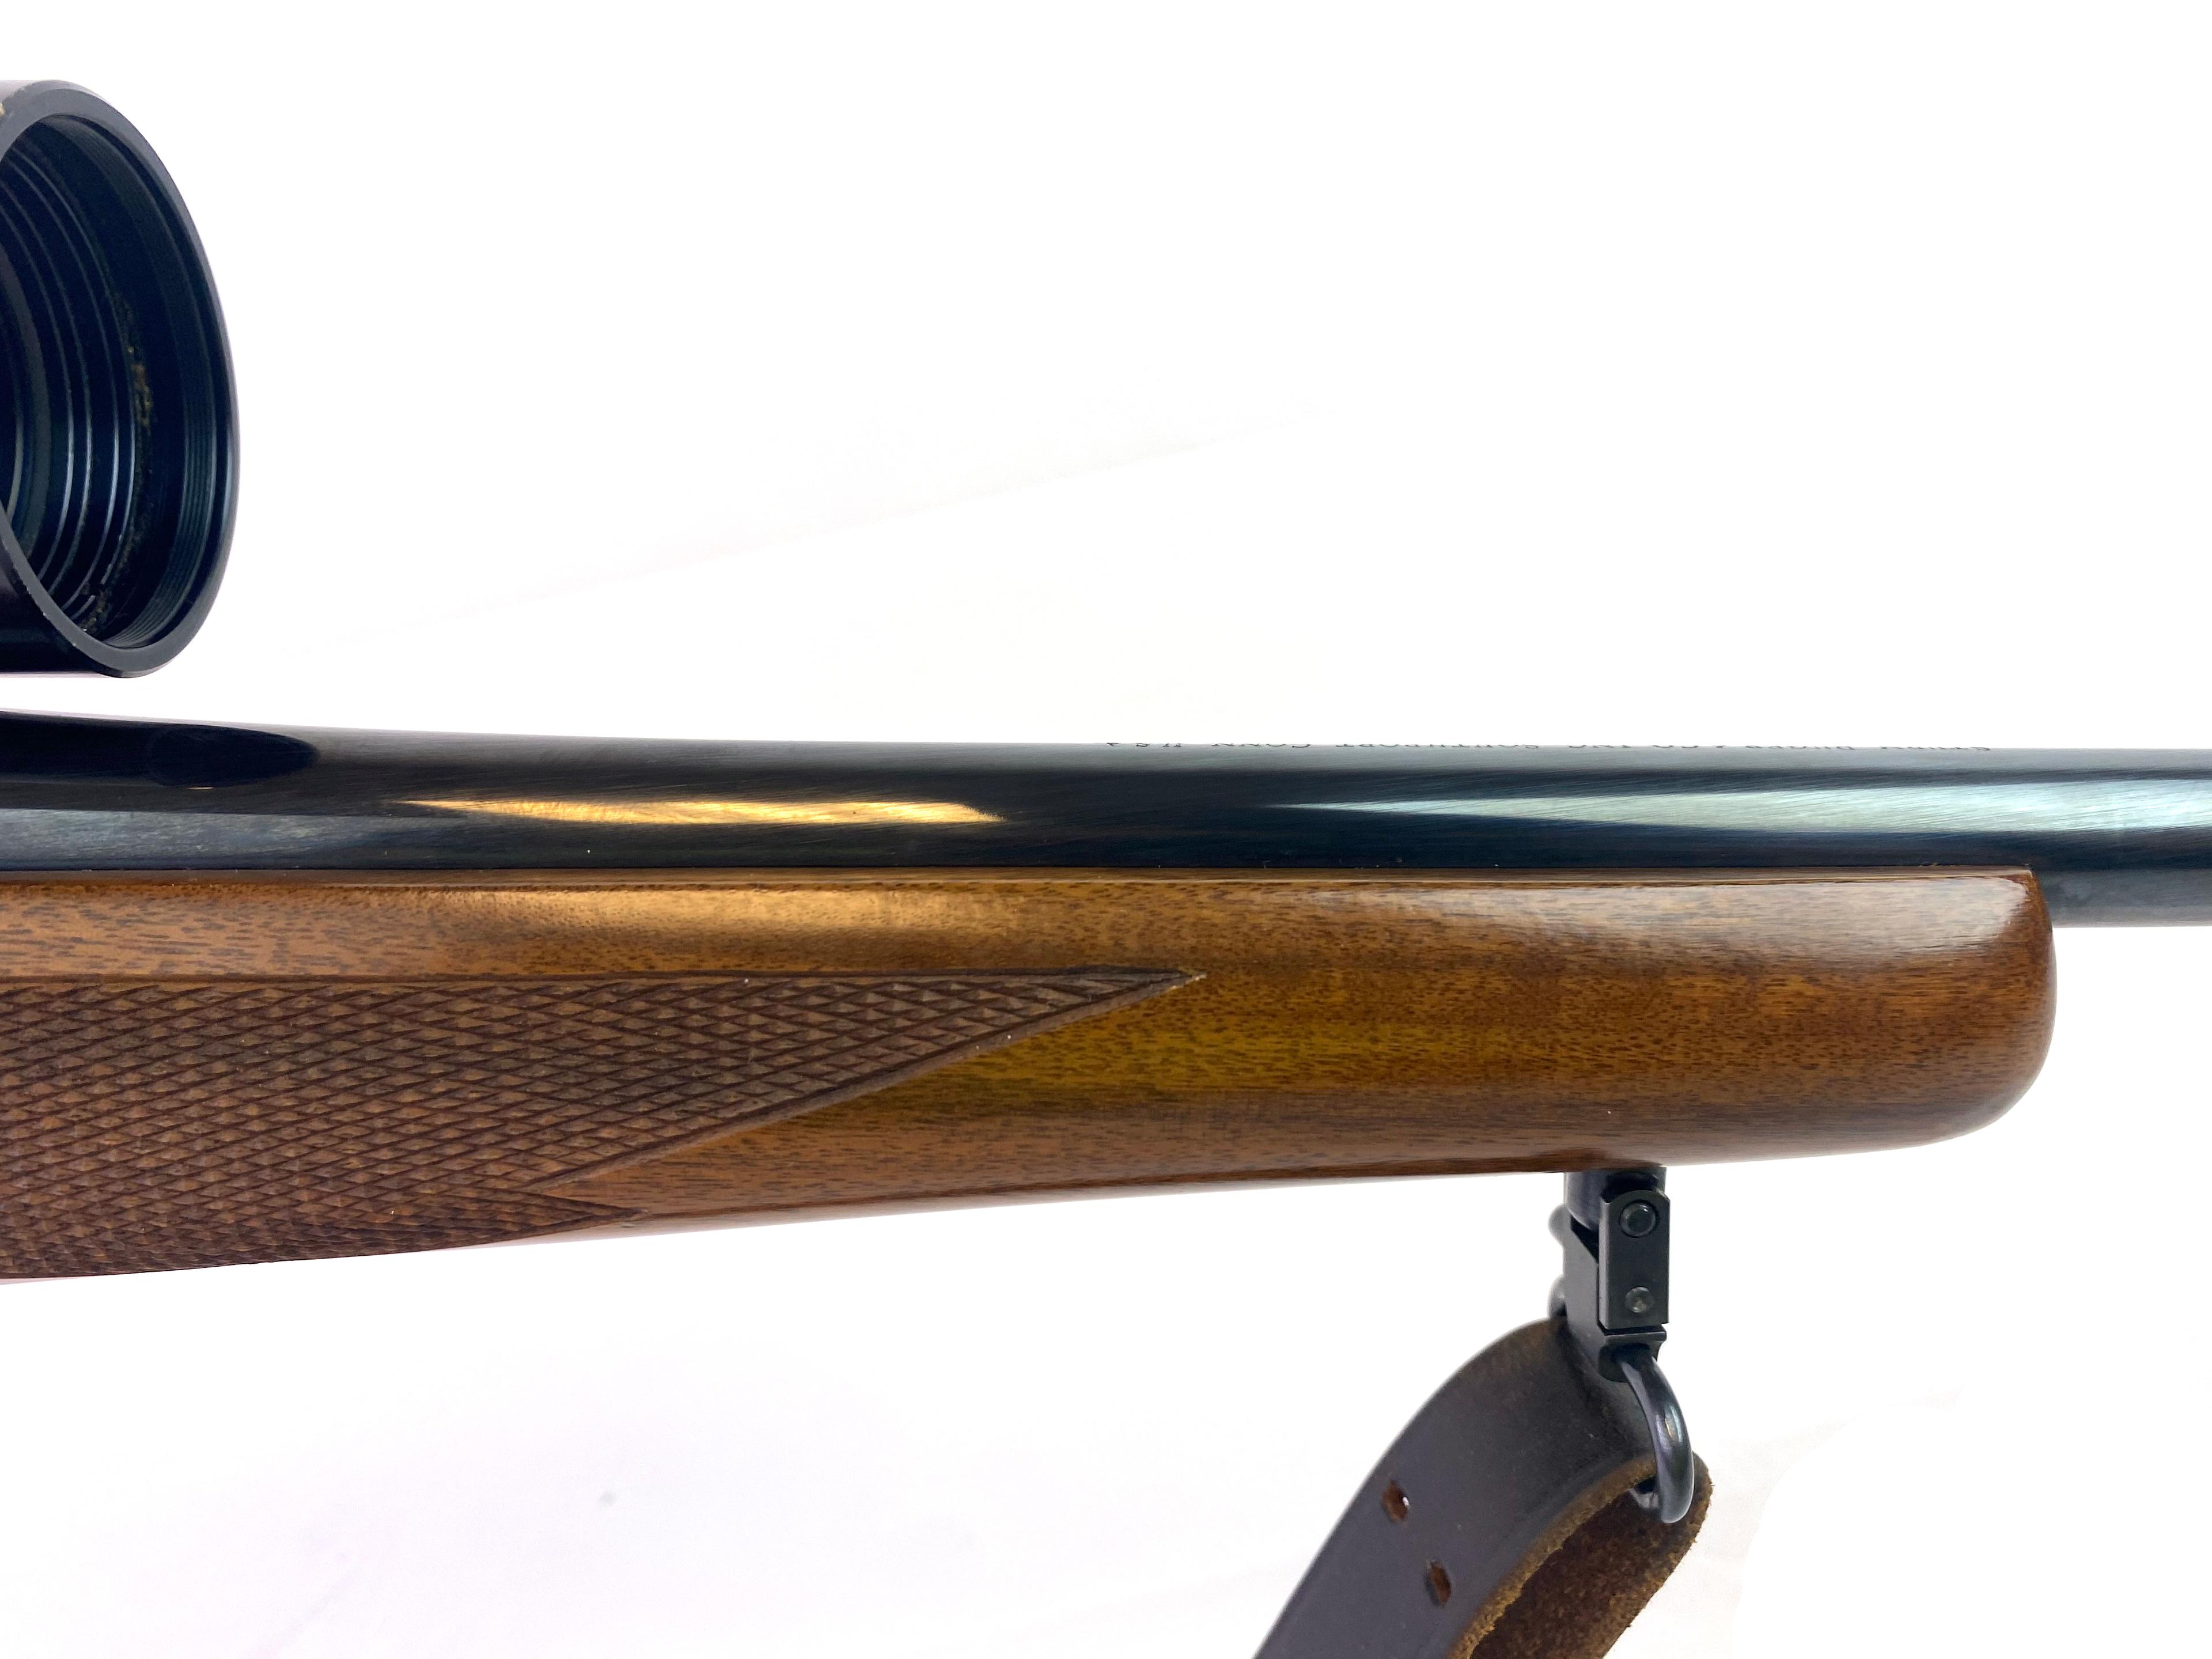 Excellent 1977 Ruger M77 7mm Rem. Mag. Tang Safety Bolt Action Rifle with Leupold Scope